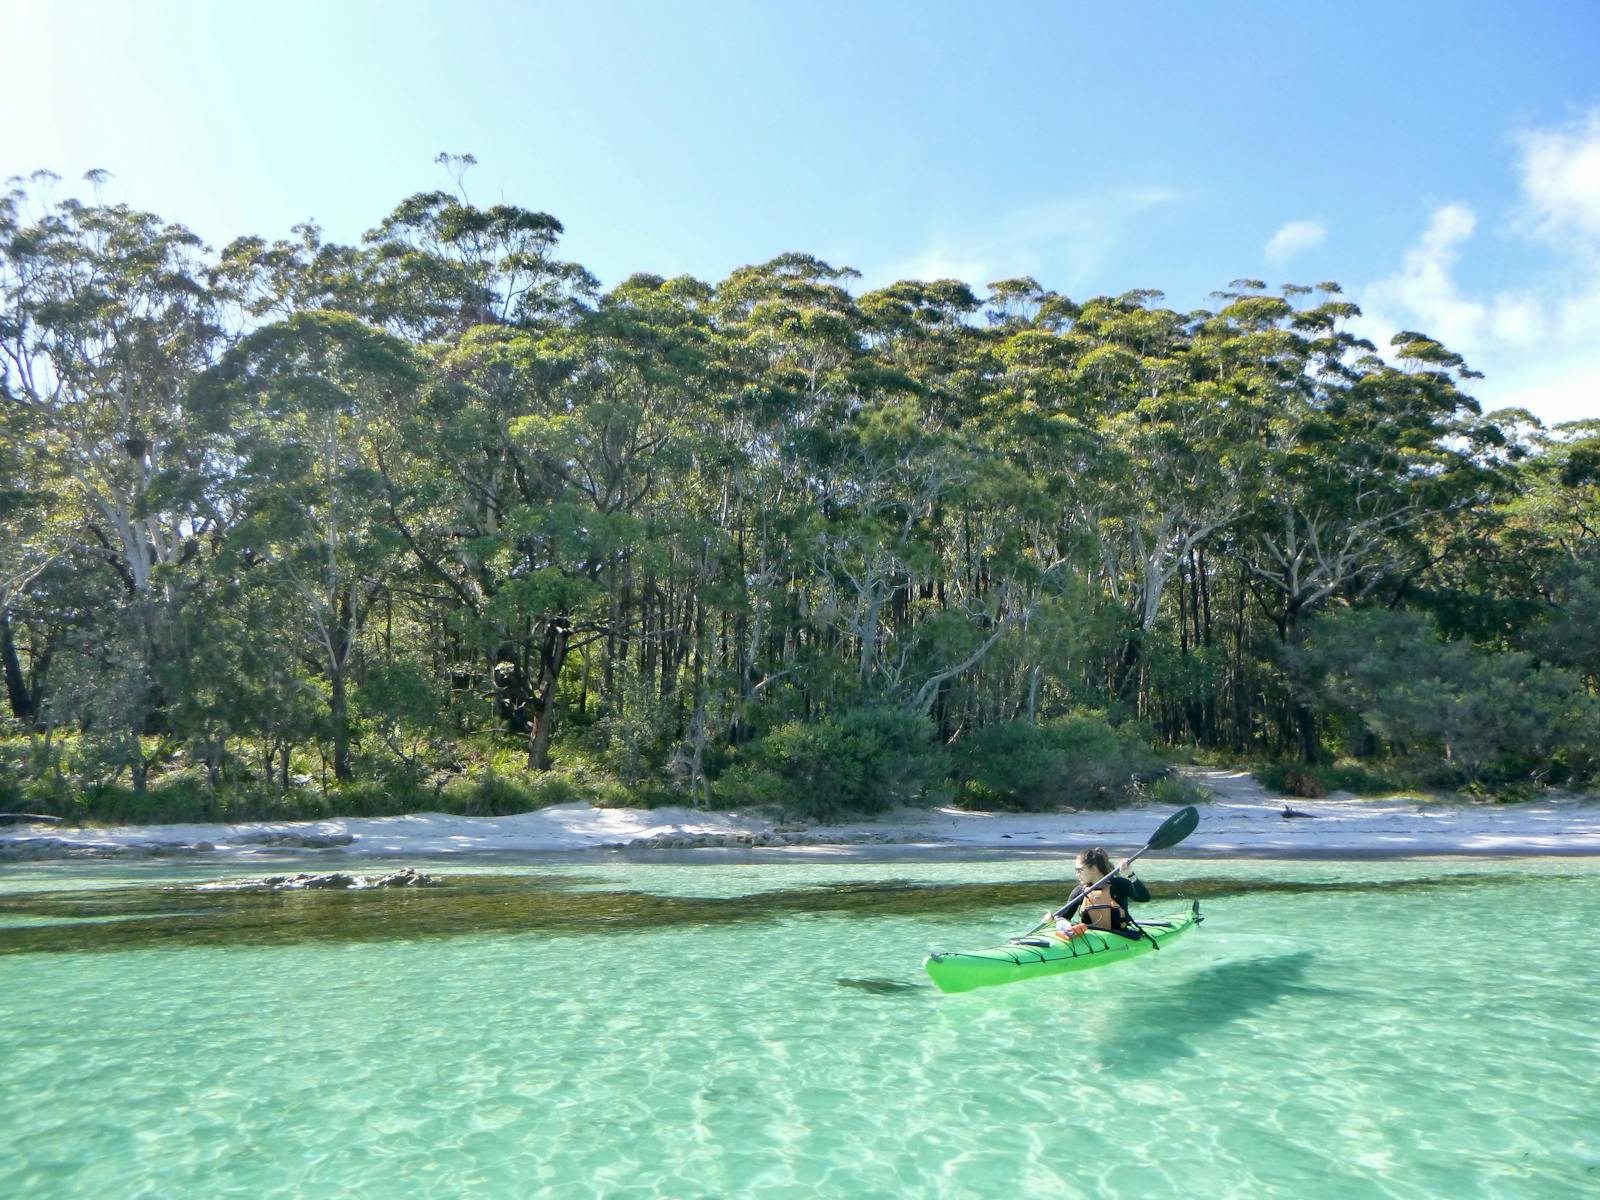 Perfectly clear water of the pristine Jervis Bay